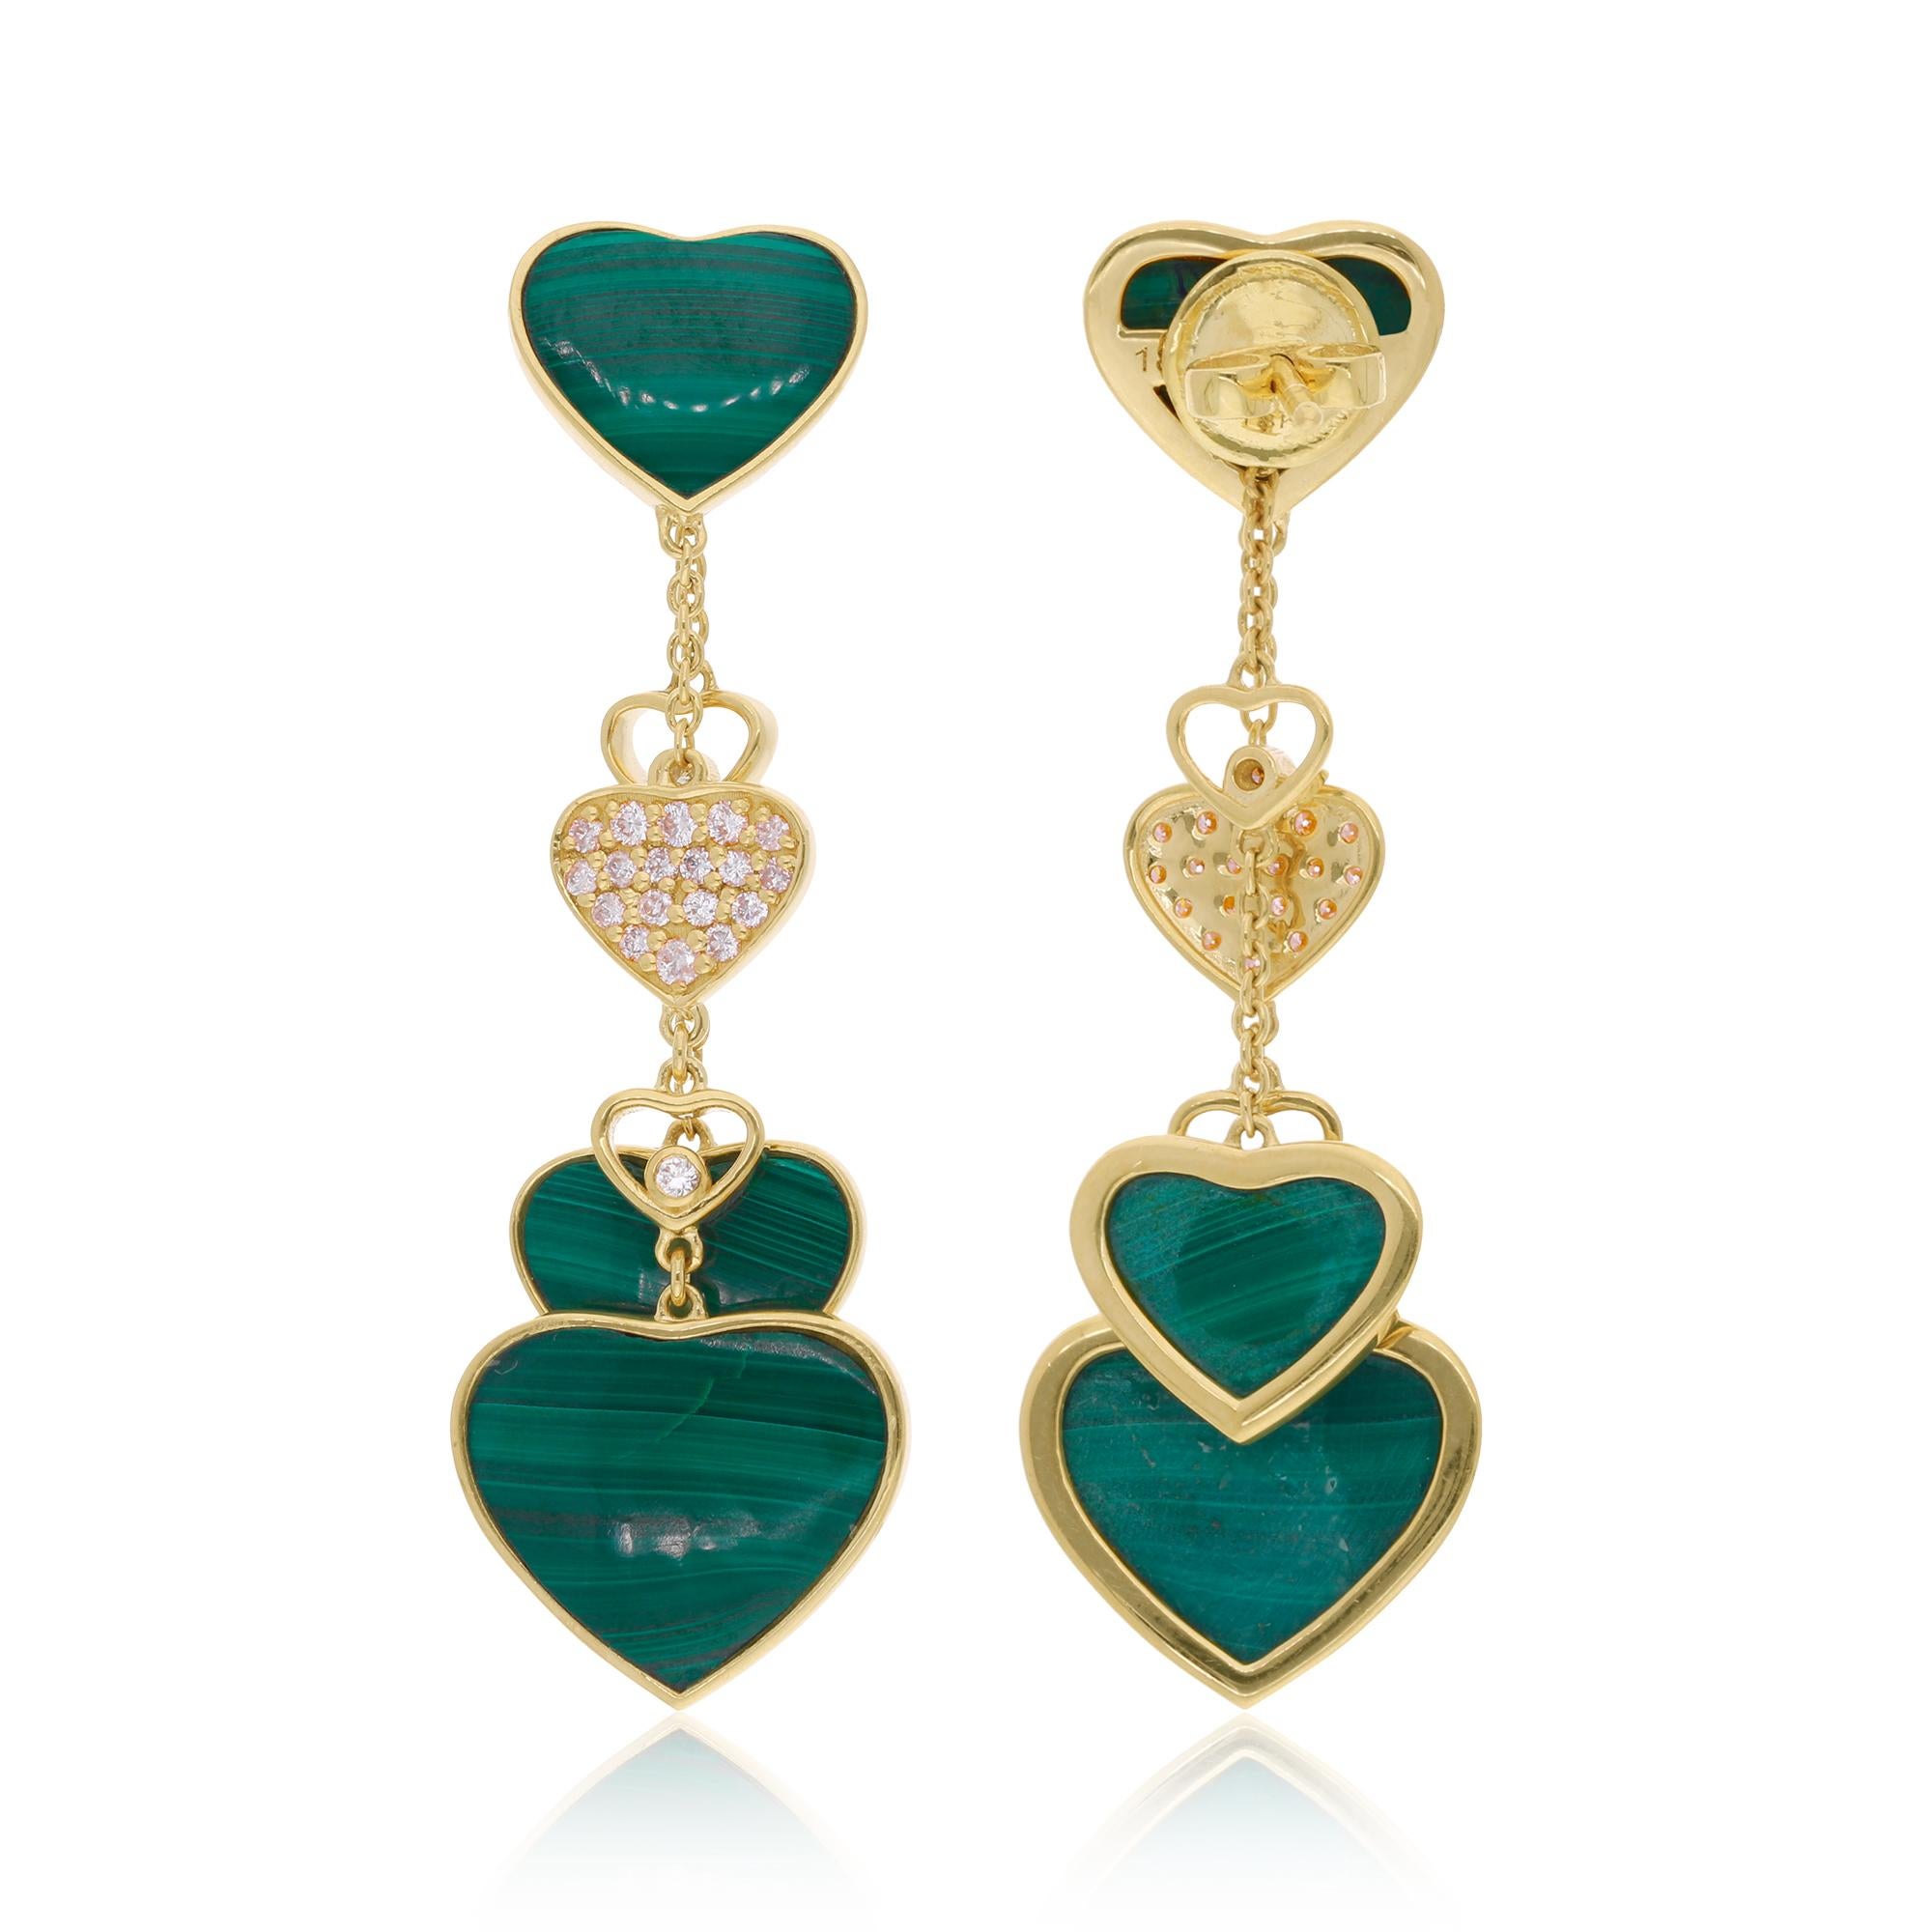 Item Code :- SEE-14638 (14k)
Gross Wt. :- 9.45 gm
14k Solid Yellow Gold Wt. :- 6.78 gm
Natural Diamond Wt. :- 0.37 Ct. ( AVERAGE DIAMOND CLARITY SI1-SI2 & COLOR H-I )
Malachite Wt. :- 13 Ct.
Earrings Size :- 47 mm approx.

✦